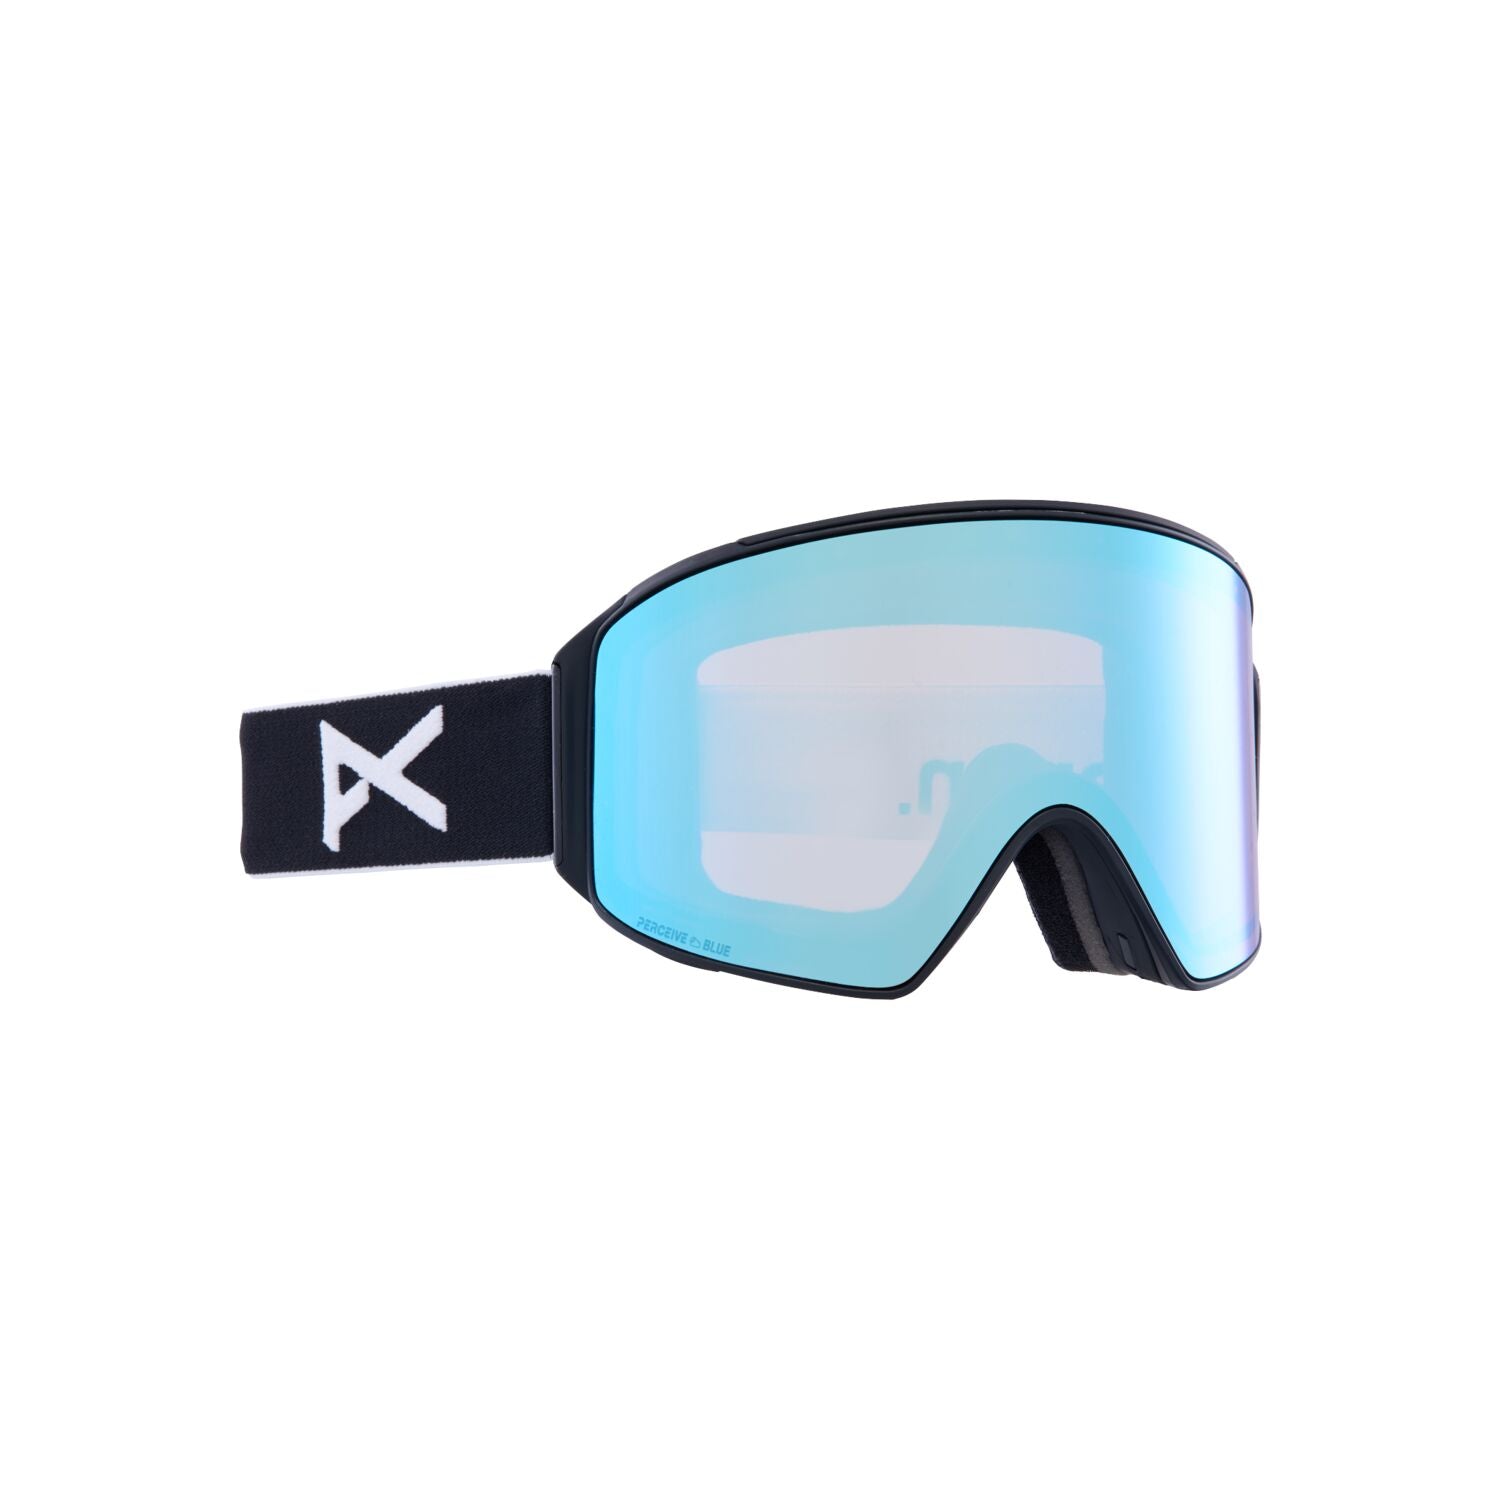 Anon M4 Cylindrical Goggles + Bonus Lens + MFI Face Mask - Low Bridge Fit - Openbox Black Perceive Variable Blue Snow Goggles